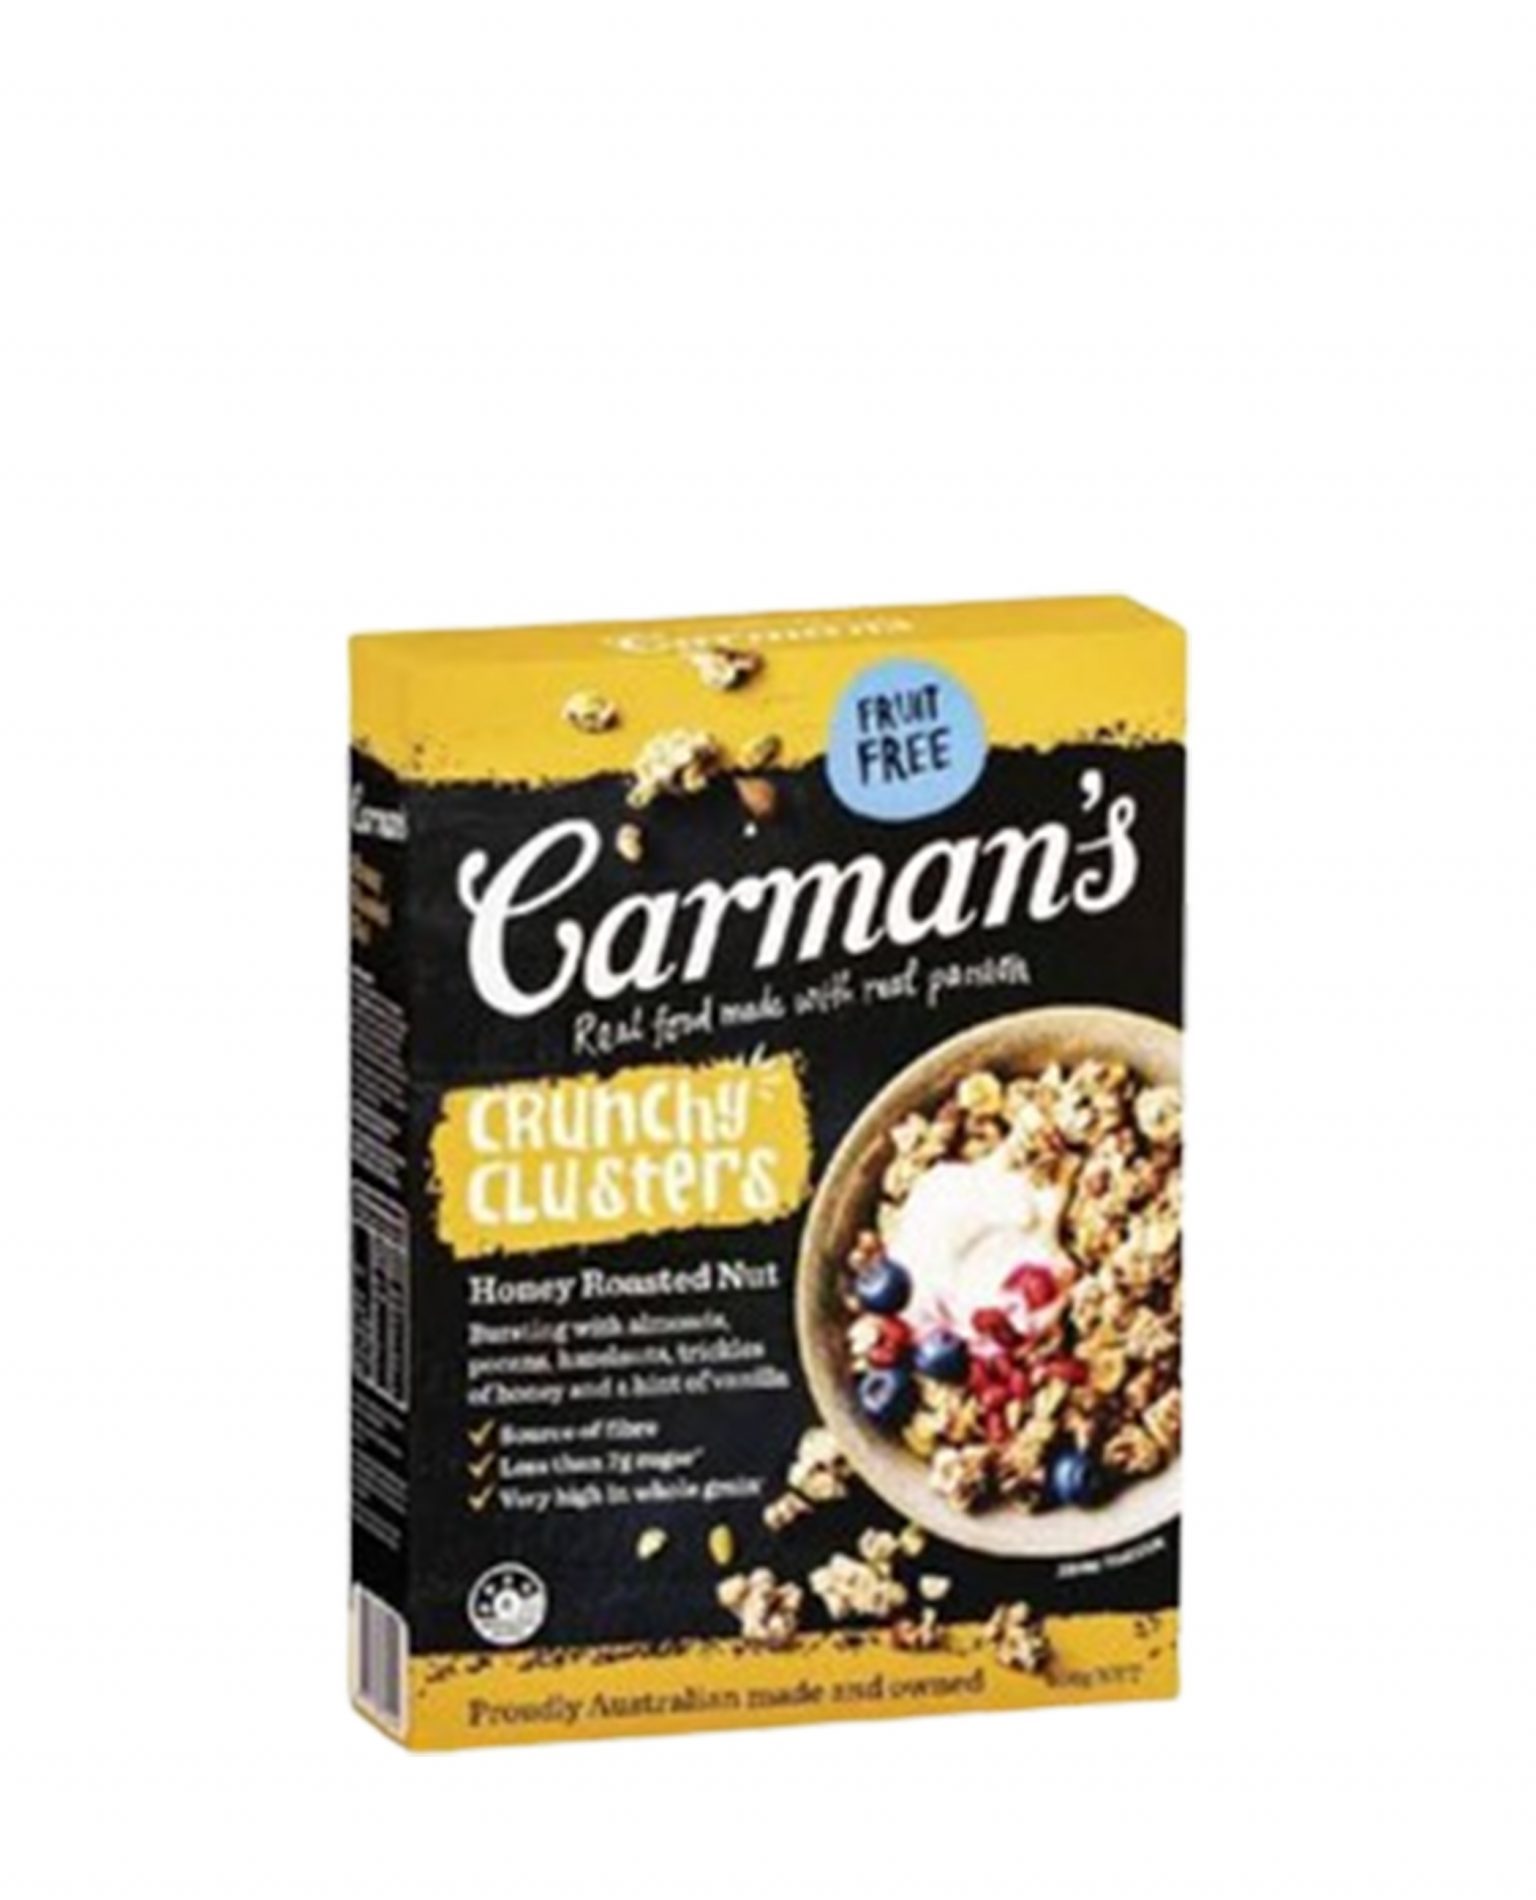 Carman's Crunchy Clusters Honey Roasted Nuts-image